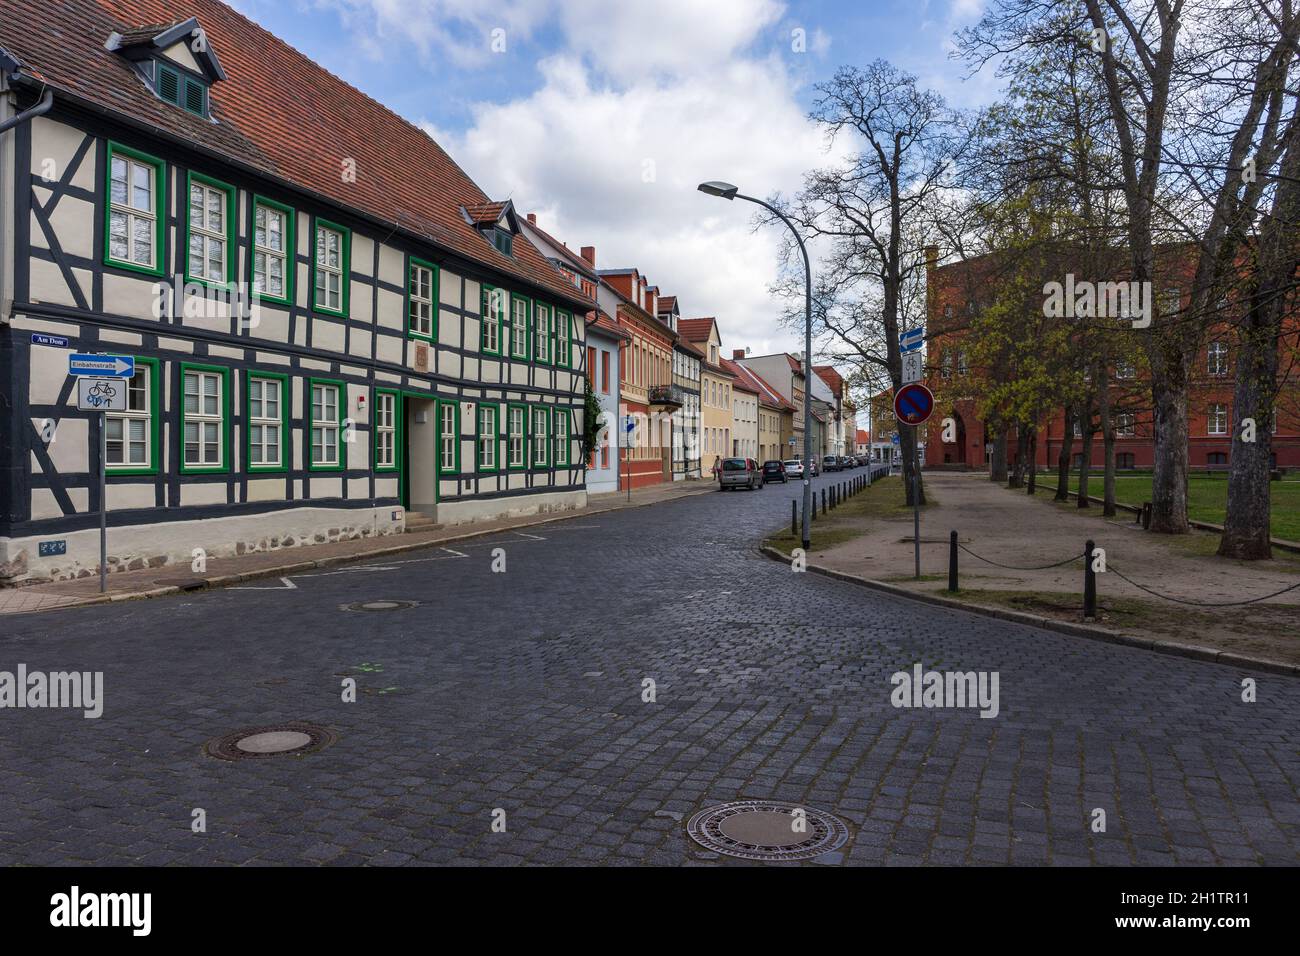 STENDAL, GERMANY - APRIL 24, 2021: Houses and buildings on the streets in the old town. Hansestadt Stendal is a medieval town in Saxony-Anhalt state. Stock Photo